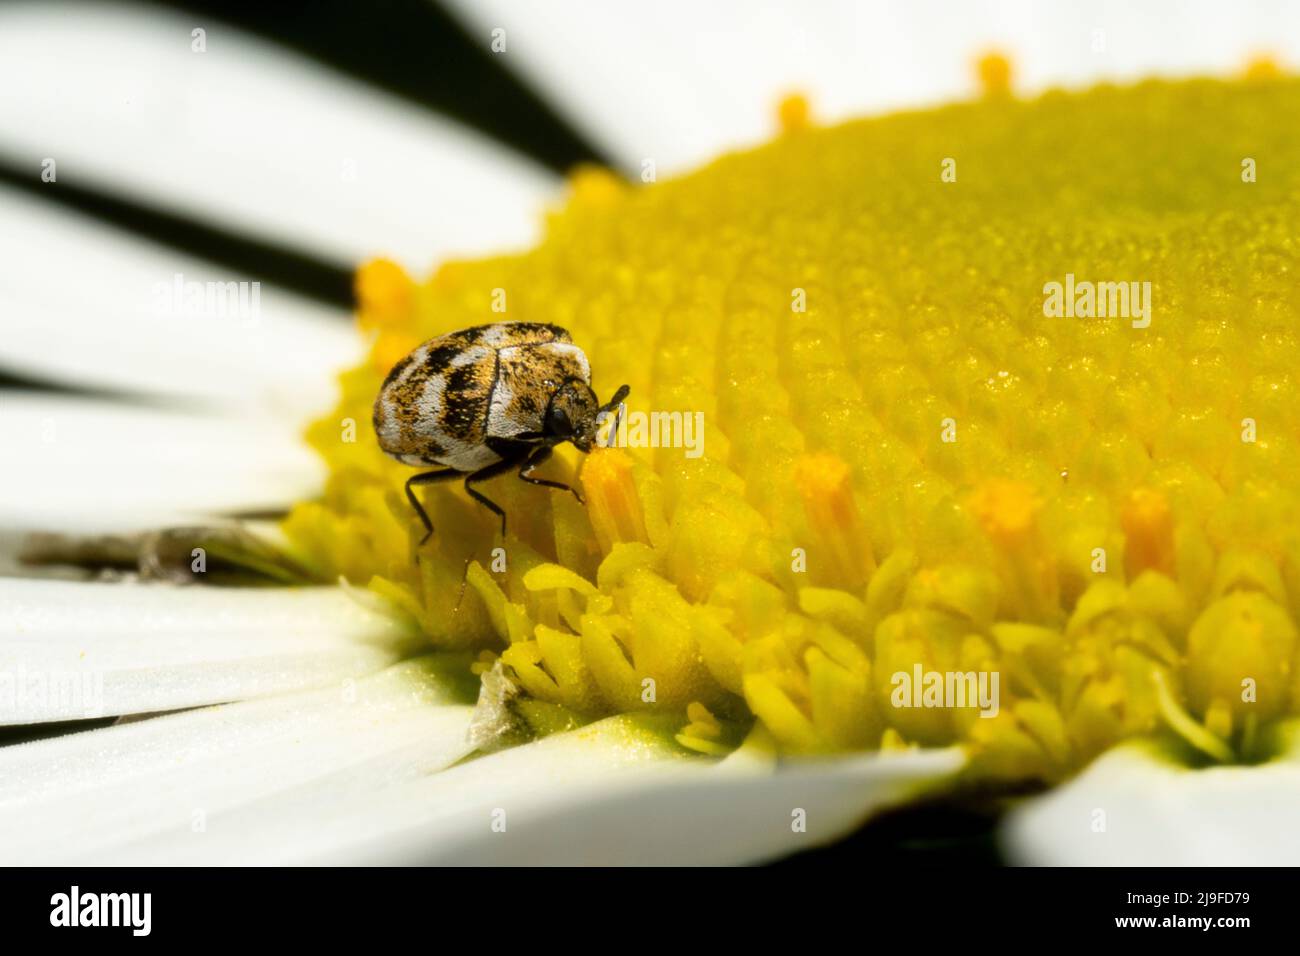 Near view of a braun-beige spotted beetle on a marguerite Stock Photo